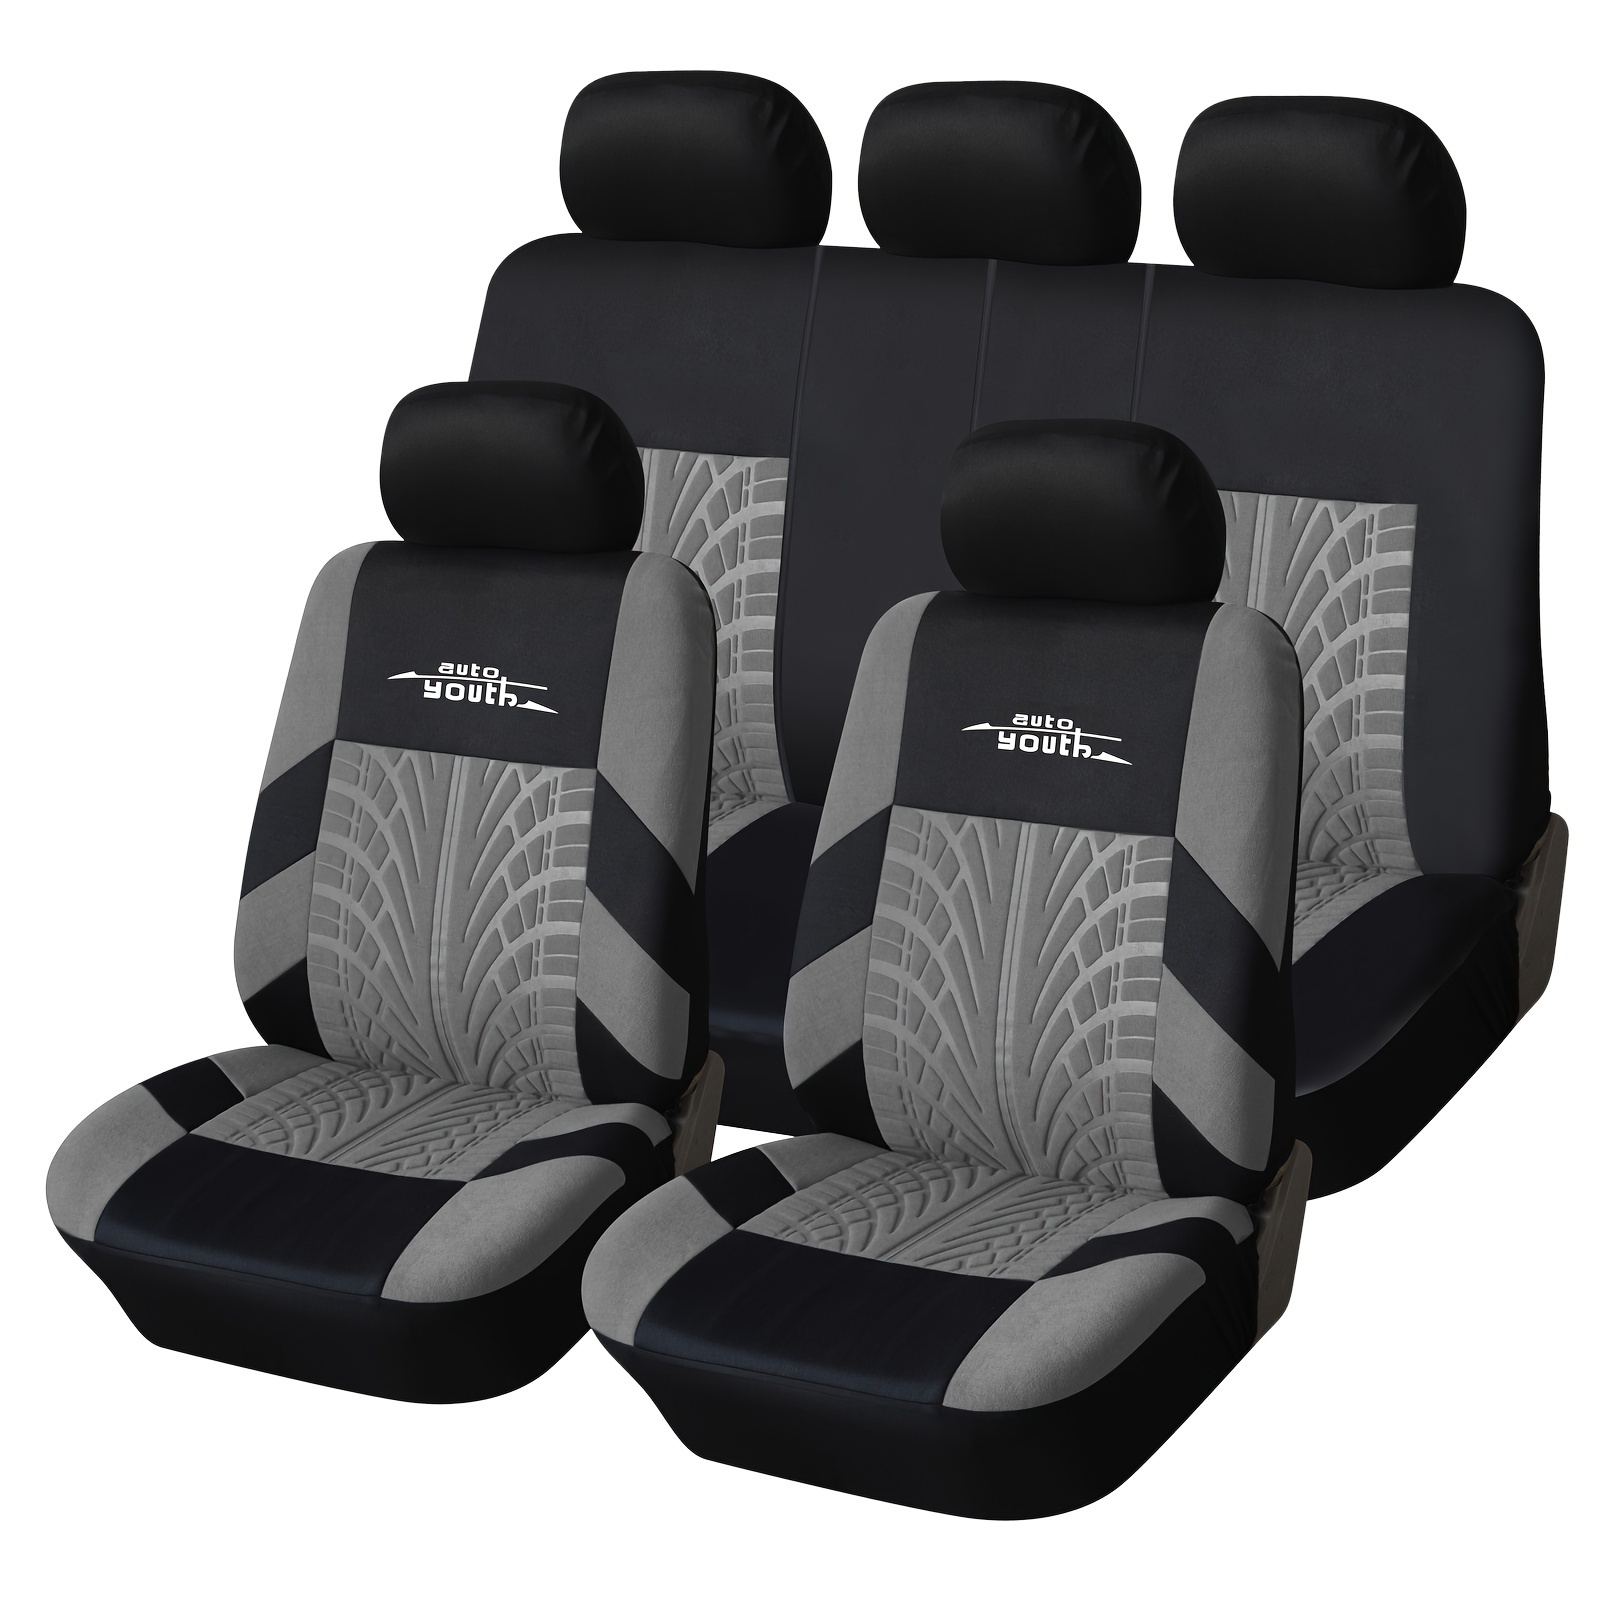 

Car Seat Covers Full Set Front Split Rear Bench For Car Universal Cloth Suv Sedan Van Automotive Interior Covers Airbag Compatible